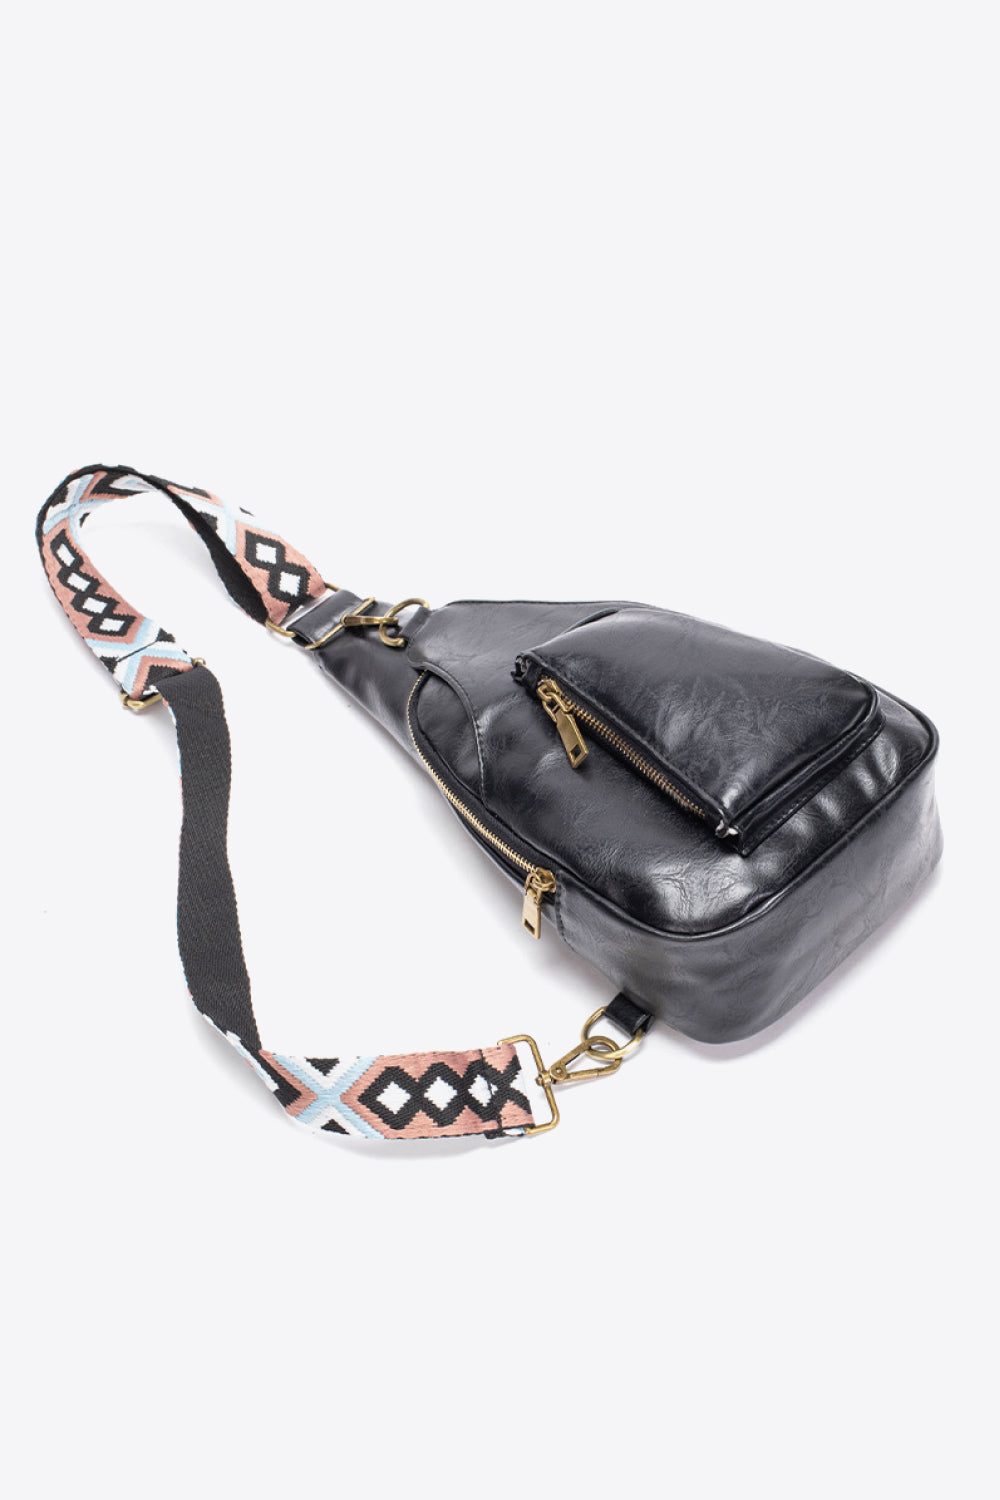 White Smoke All The Feels PU Leather Sling Bag Sentient Beauty Fashions bags &amp; totes